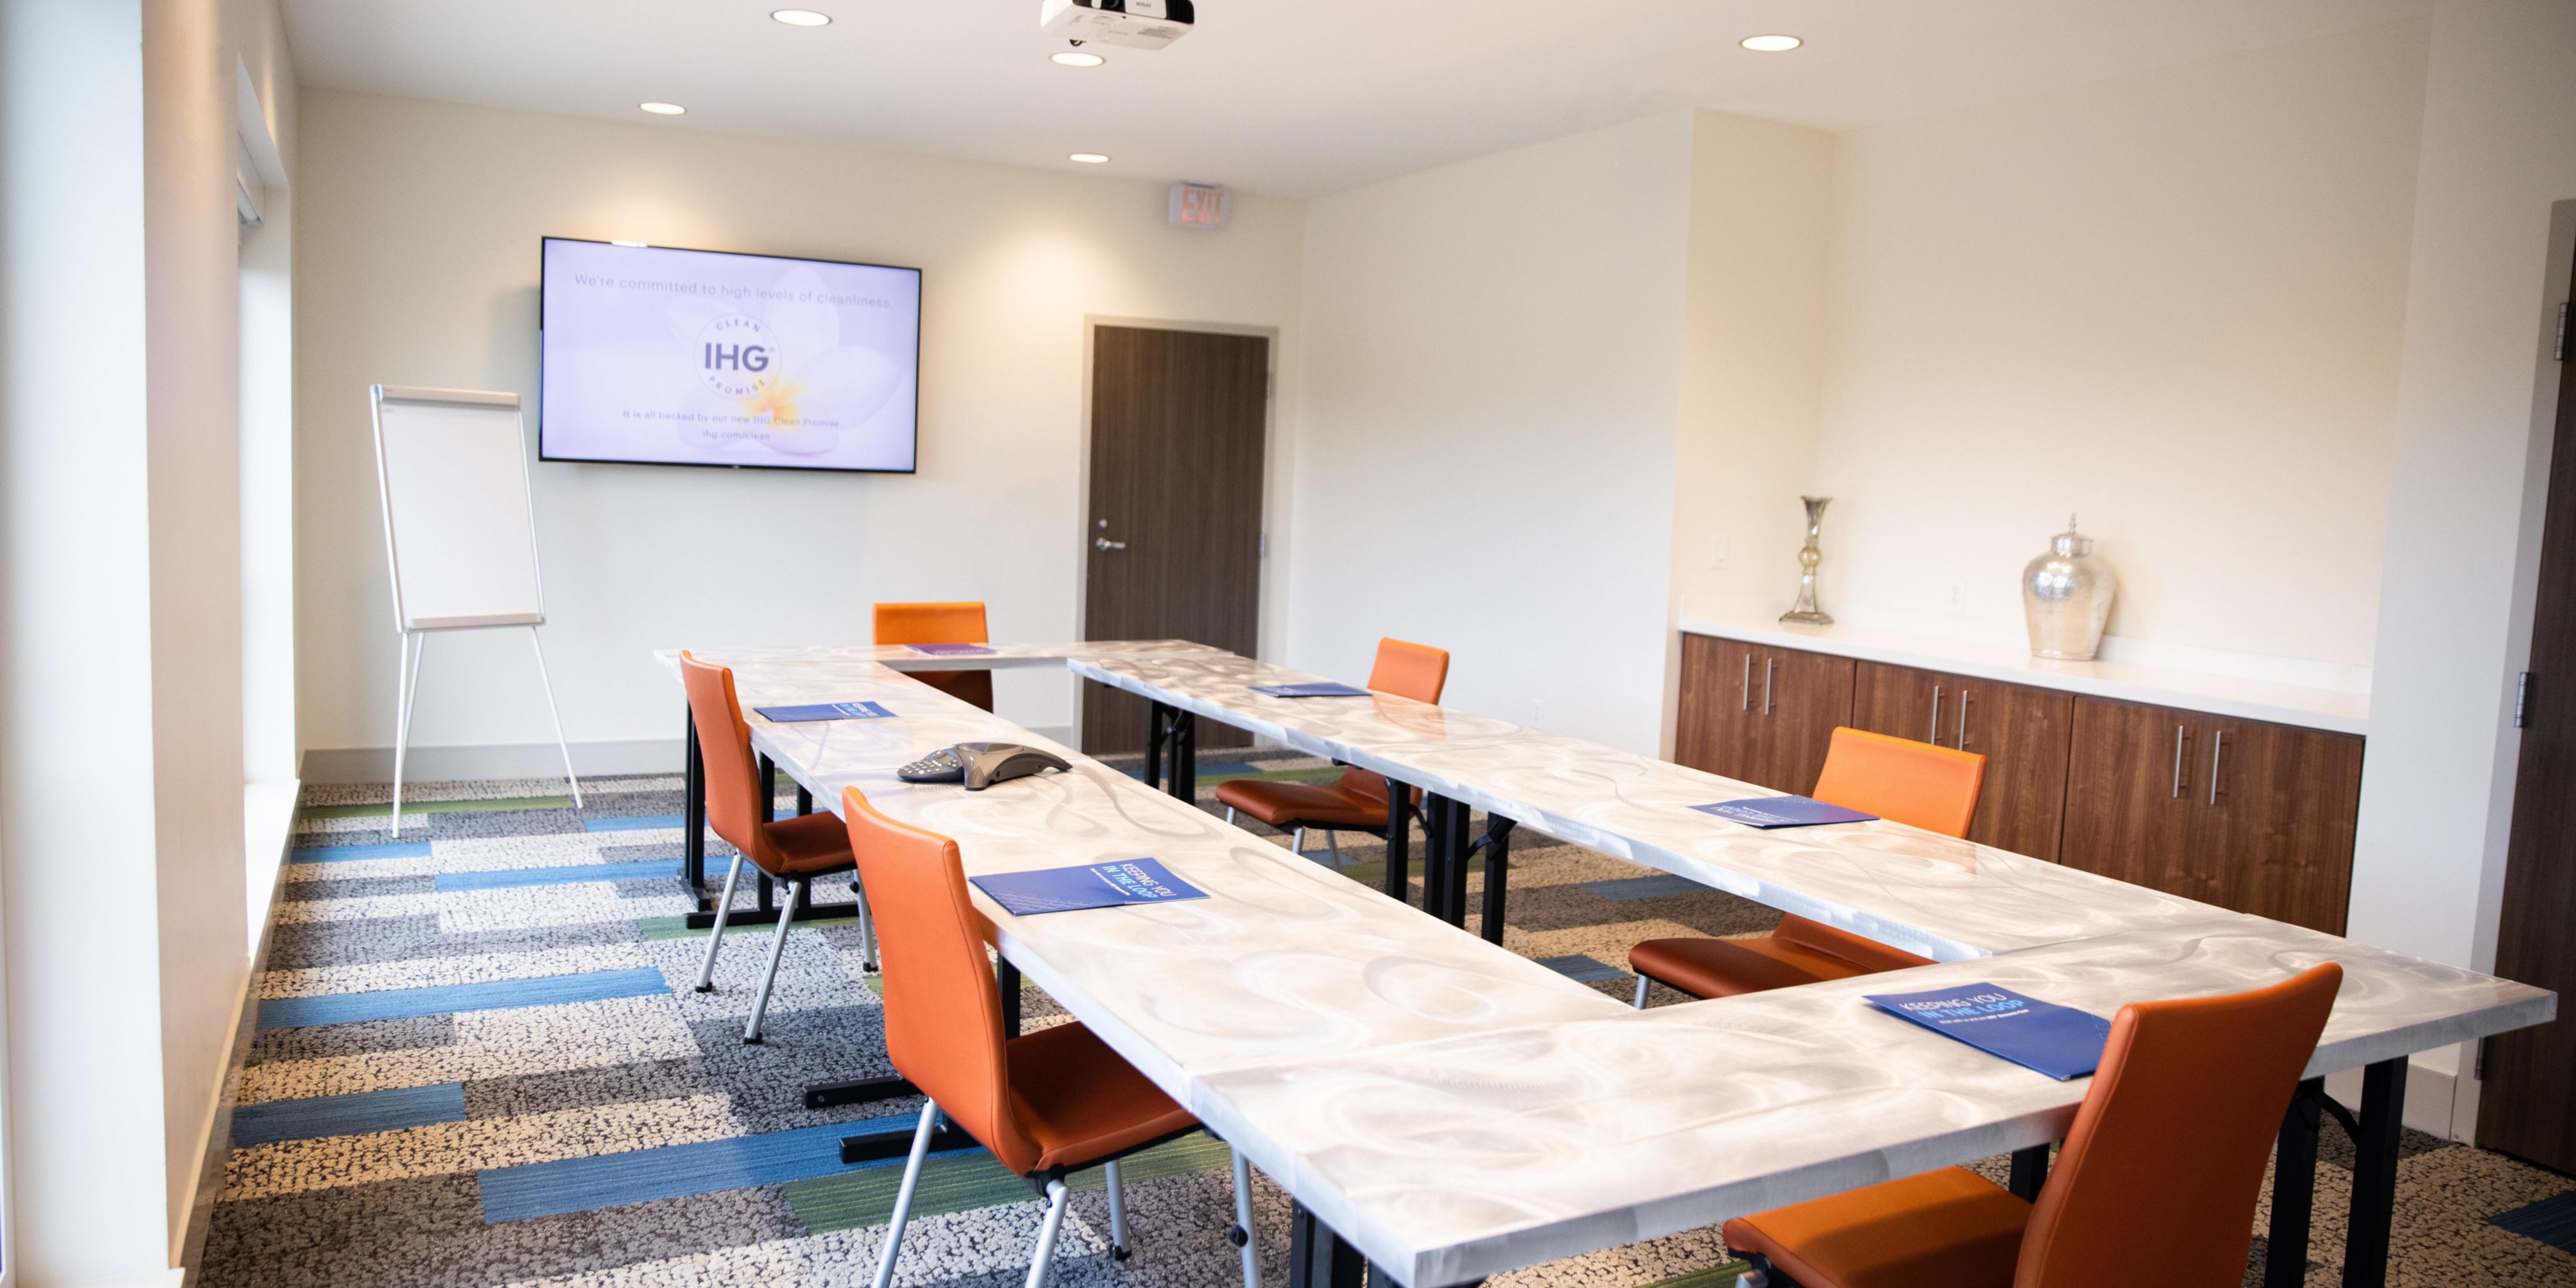 Our board rooms can be configured to accommodate social distancing. Amenities include free wireless internet, project and screen, and a 70 inch flat-screen TV. Whiteboard/flip chart and markers available upon request.  
